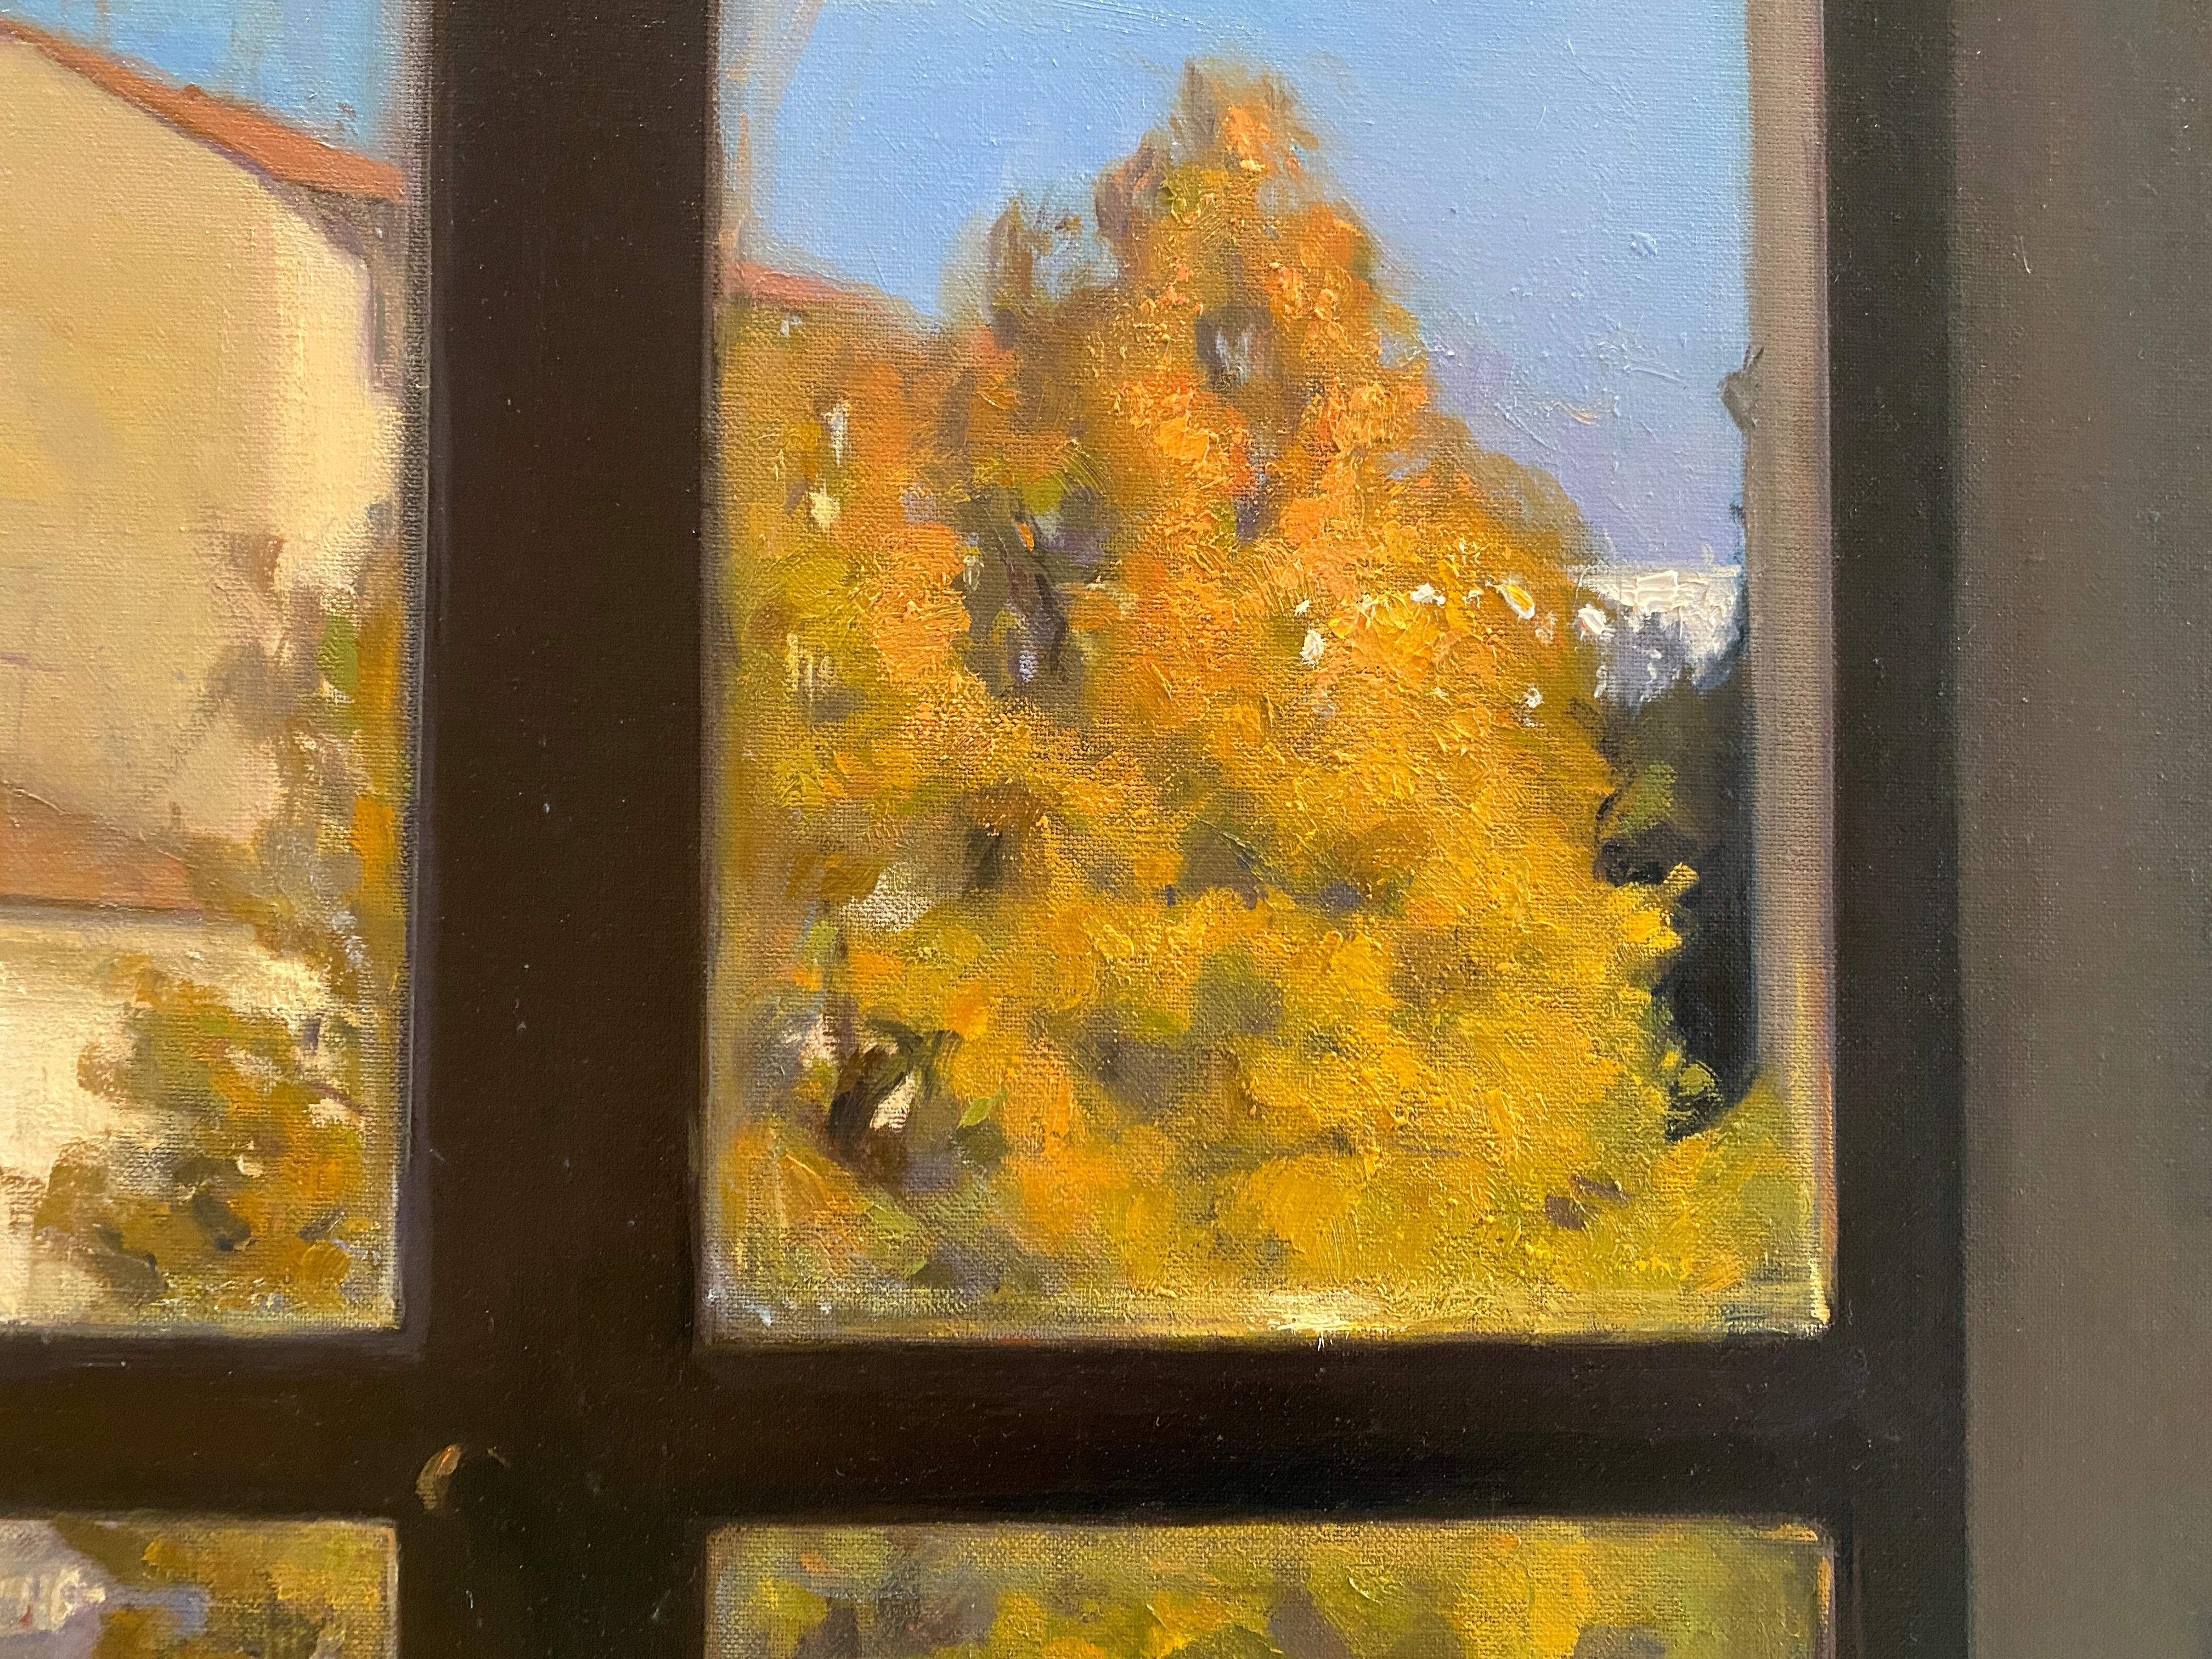 An oil on canvas painting of a landscape as seen through the window from the artist's studio. A leather couch reflects light from the window above. A bright blue sky invites us outdoors. 

Unframed dimensions: 39.5 x 29.5 inches


Melissa Franklin